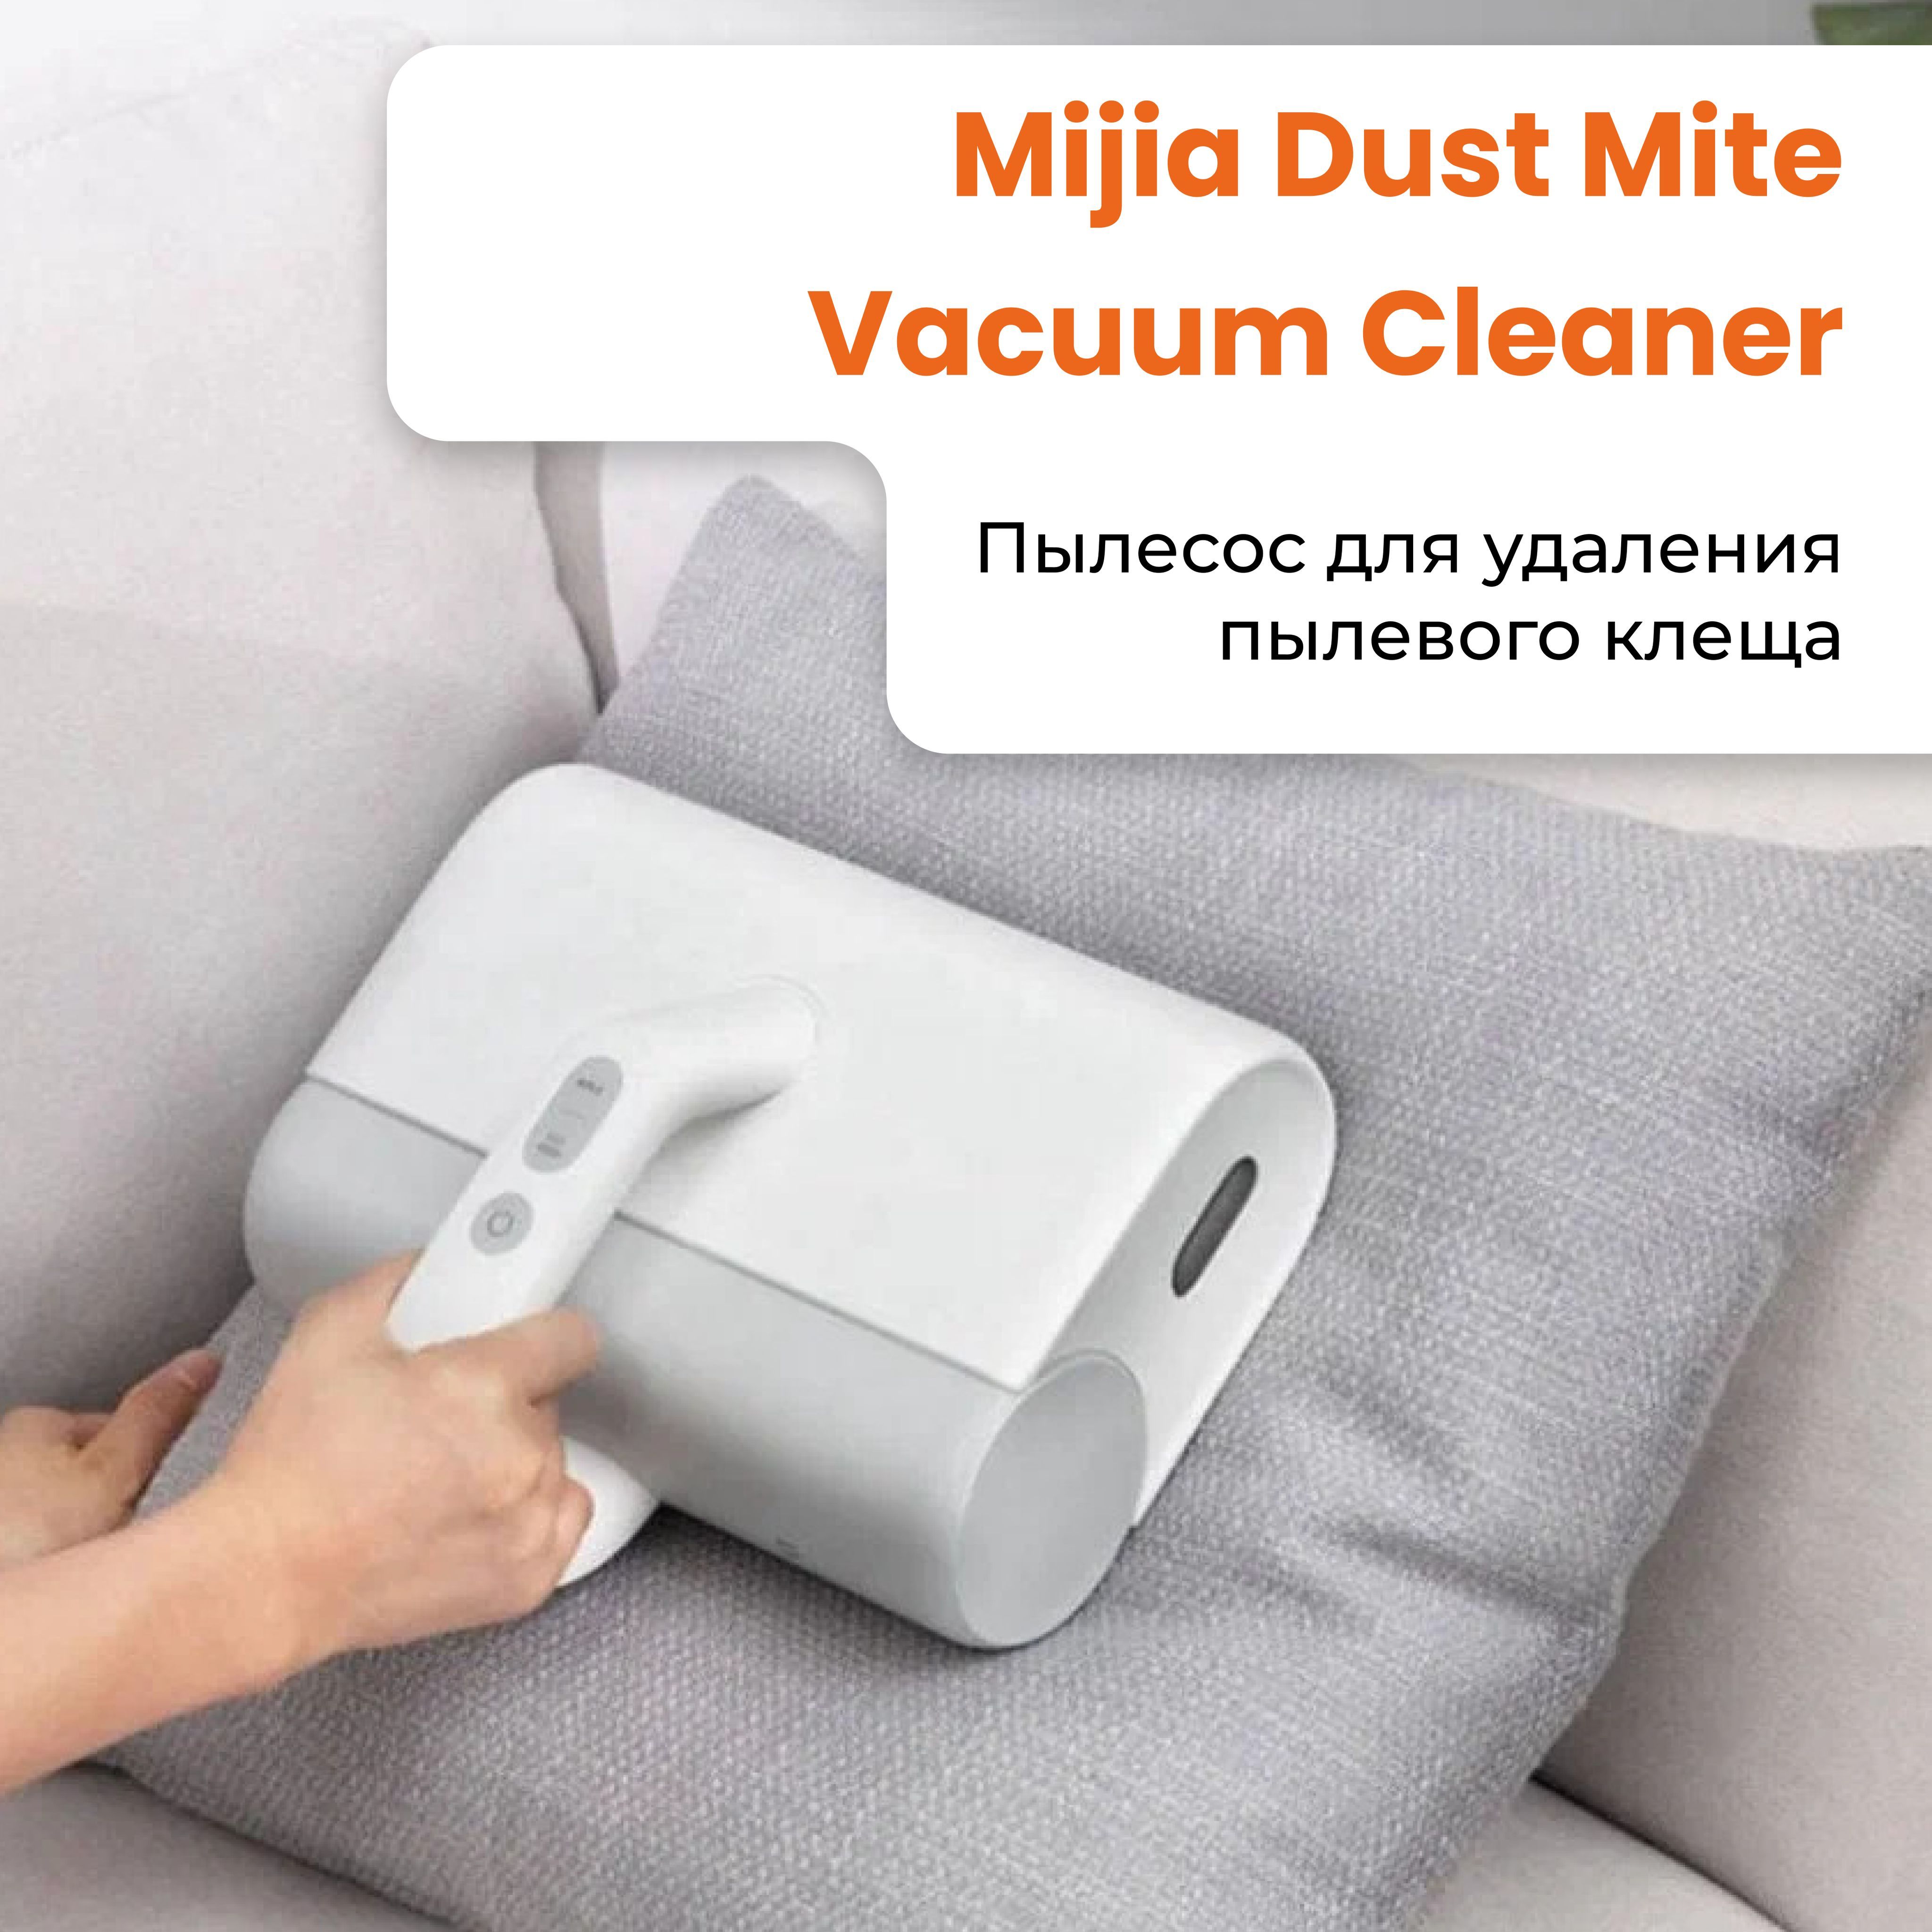 Mijia dust mite vacuum cleaner. Xiaomi mjcmy01dy. Пылесос Xiaomi (mjcmy01dy). Xiaomi Dust Mite Vacuum. Xiaomi Dust Mite Vacuum вилка.